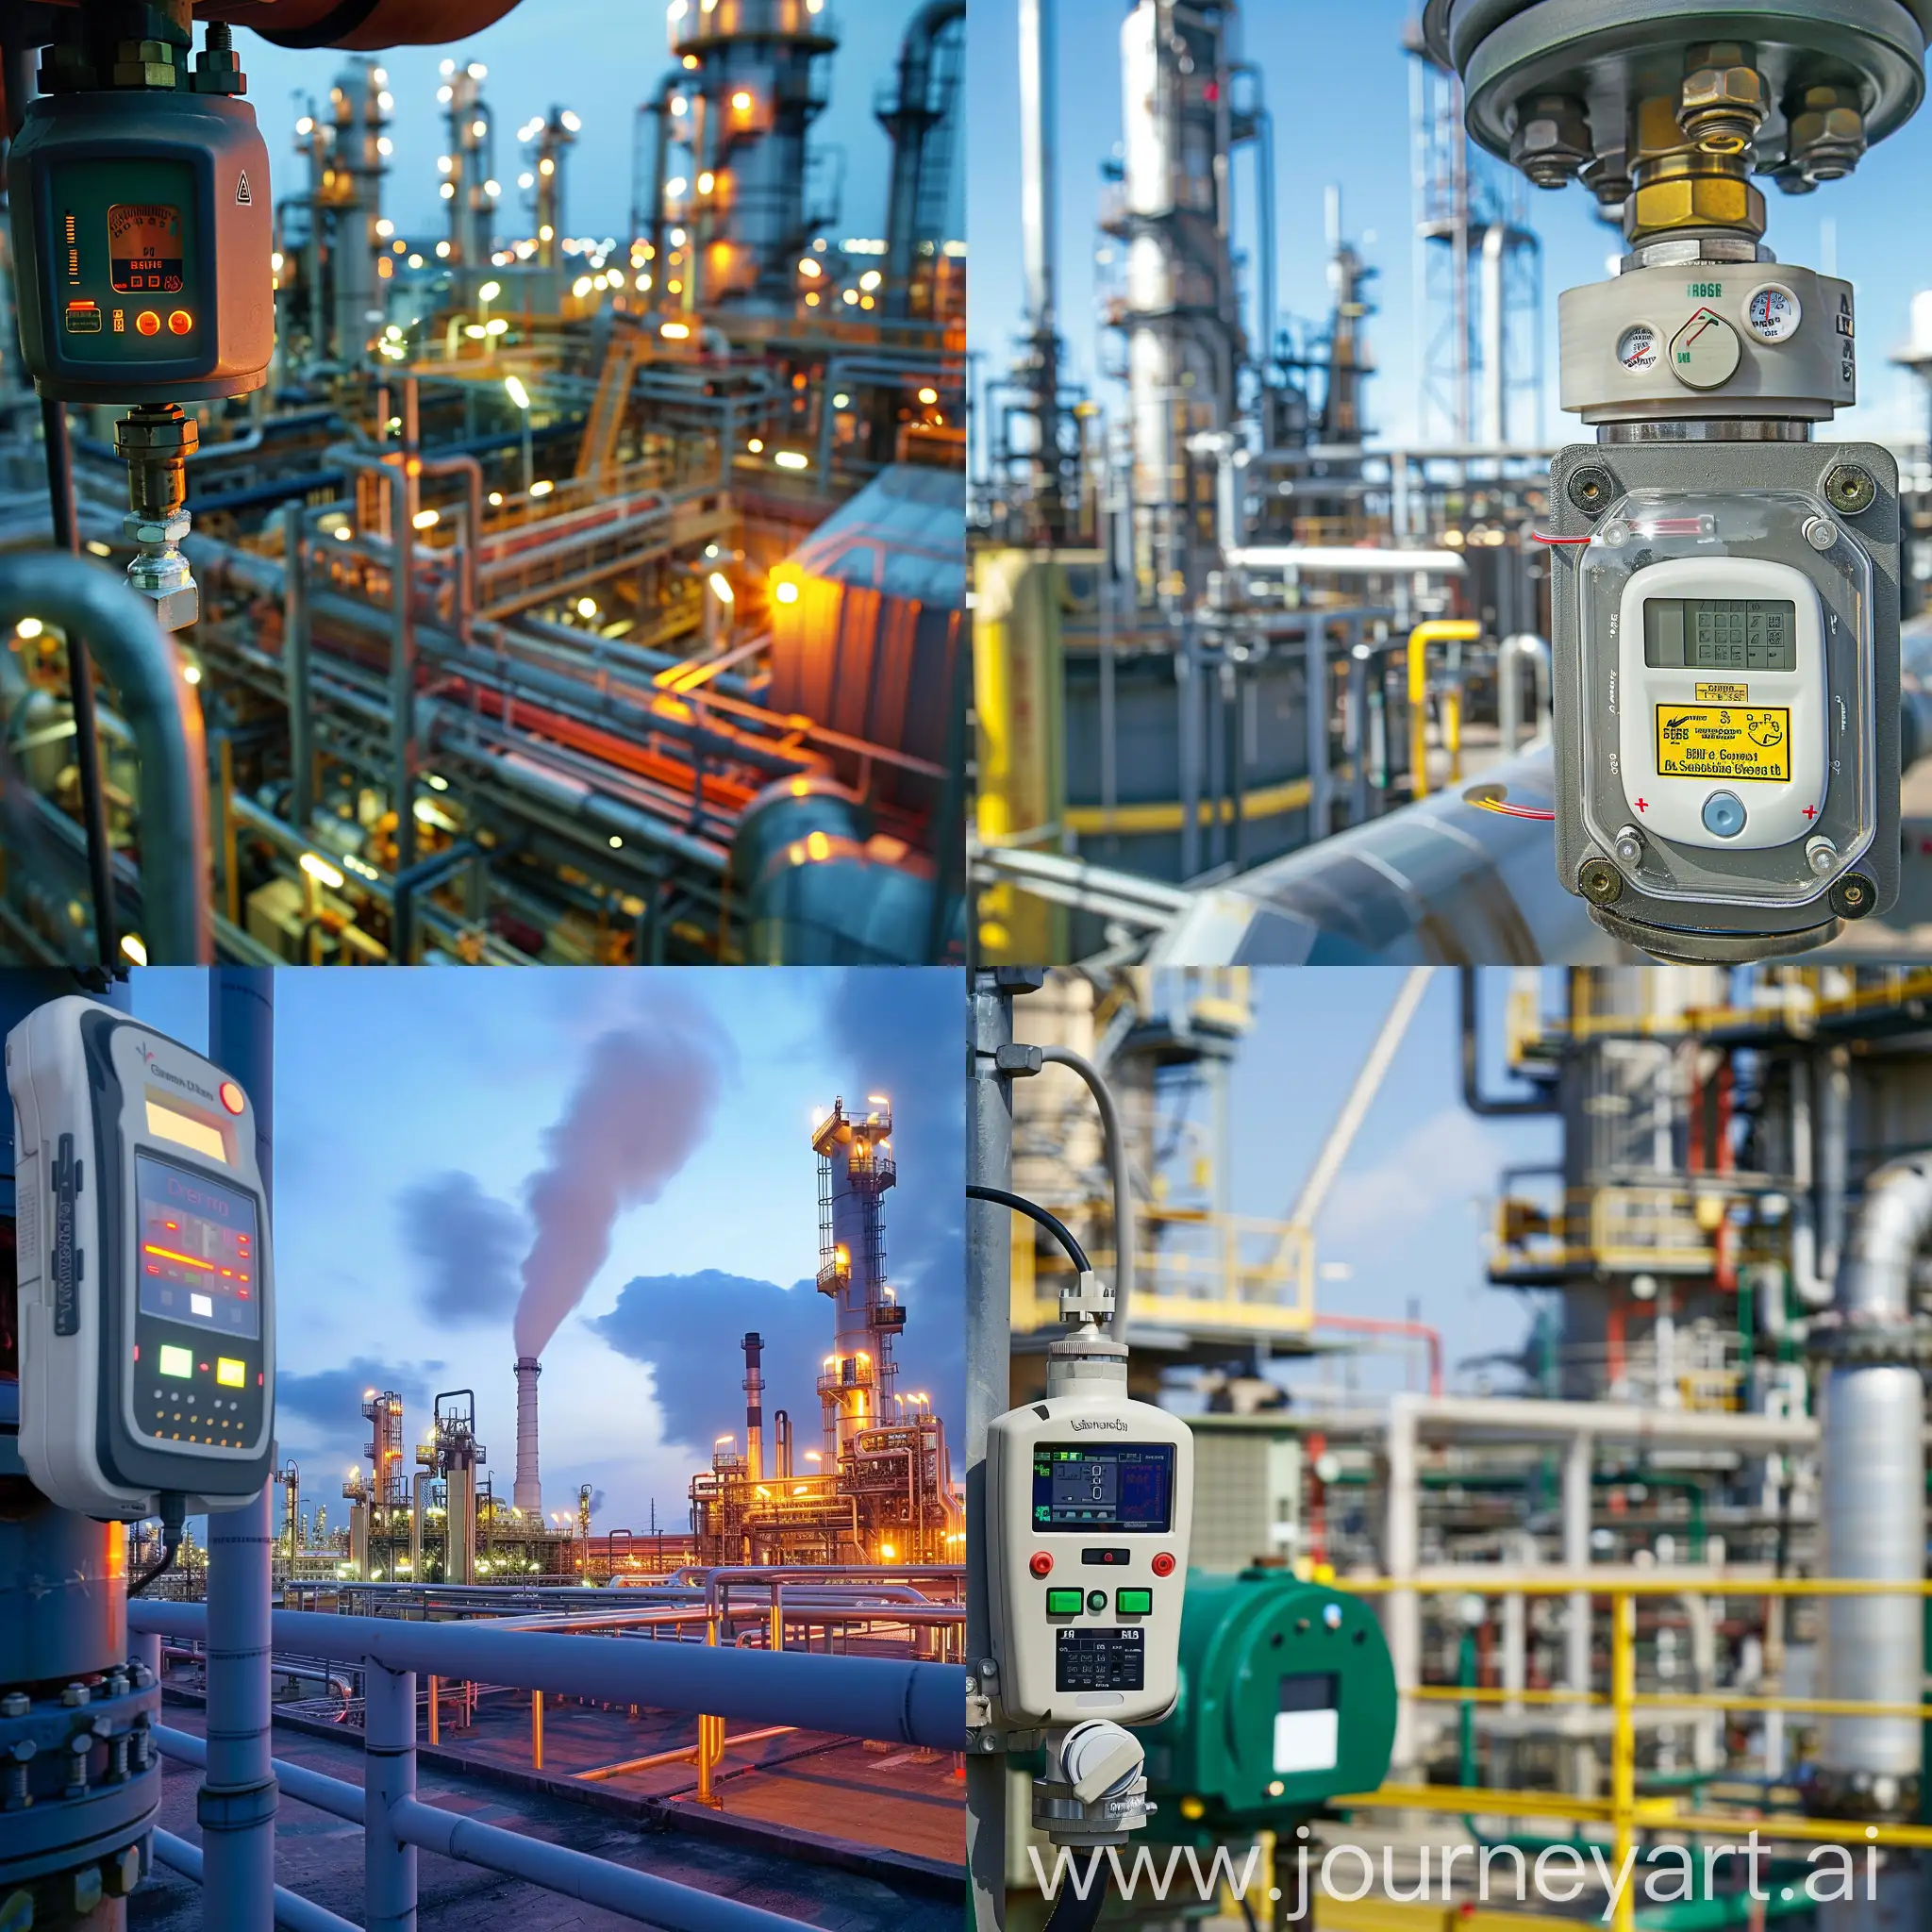 Gas-Detection-Device-Manufacturing-Company-Showcase-with-Refinery-Background